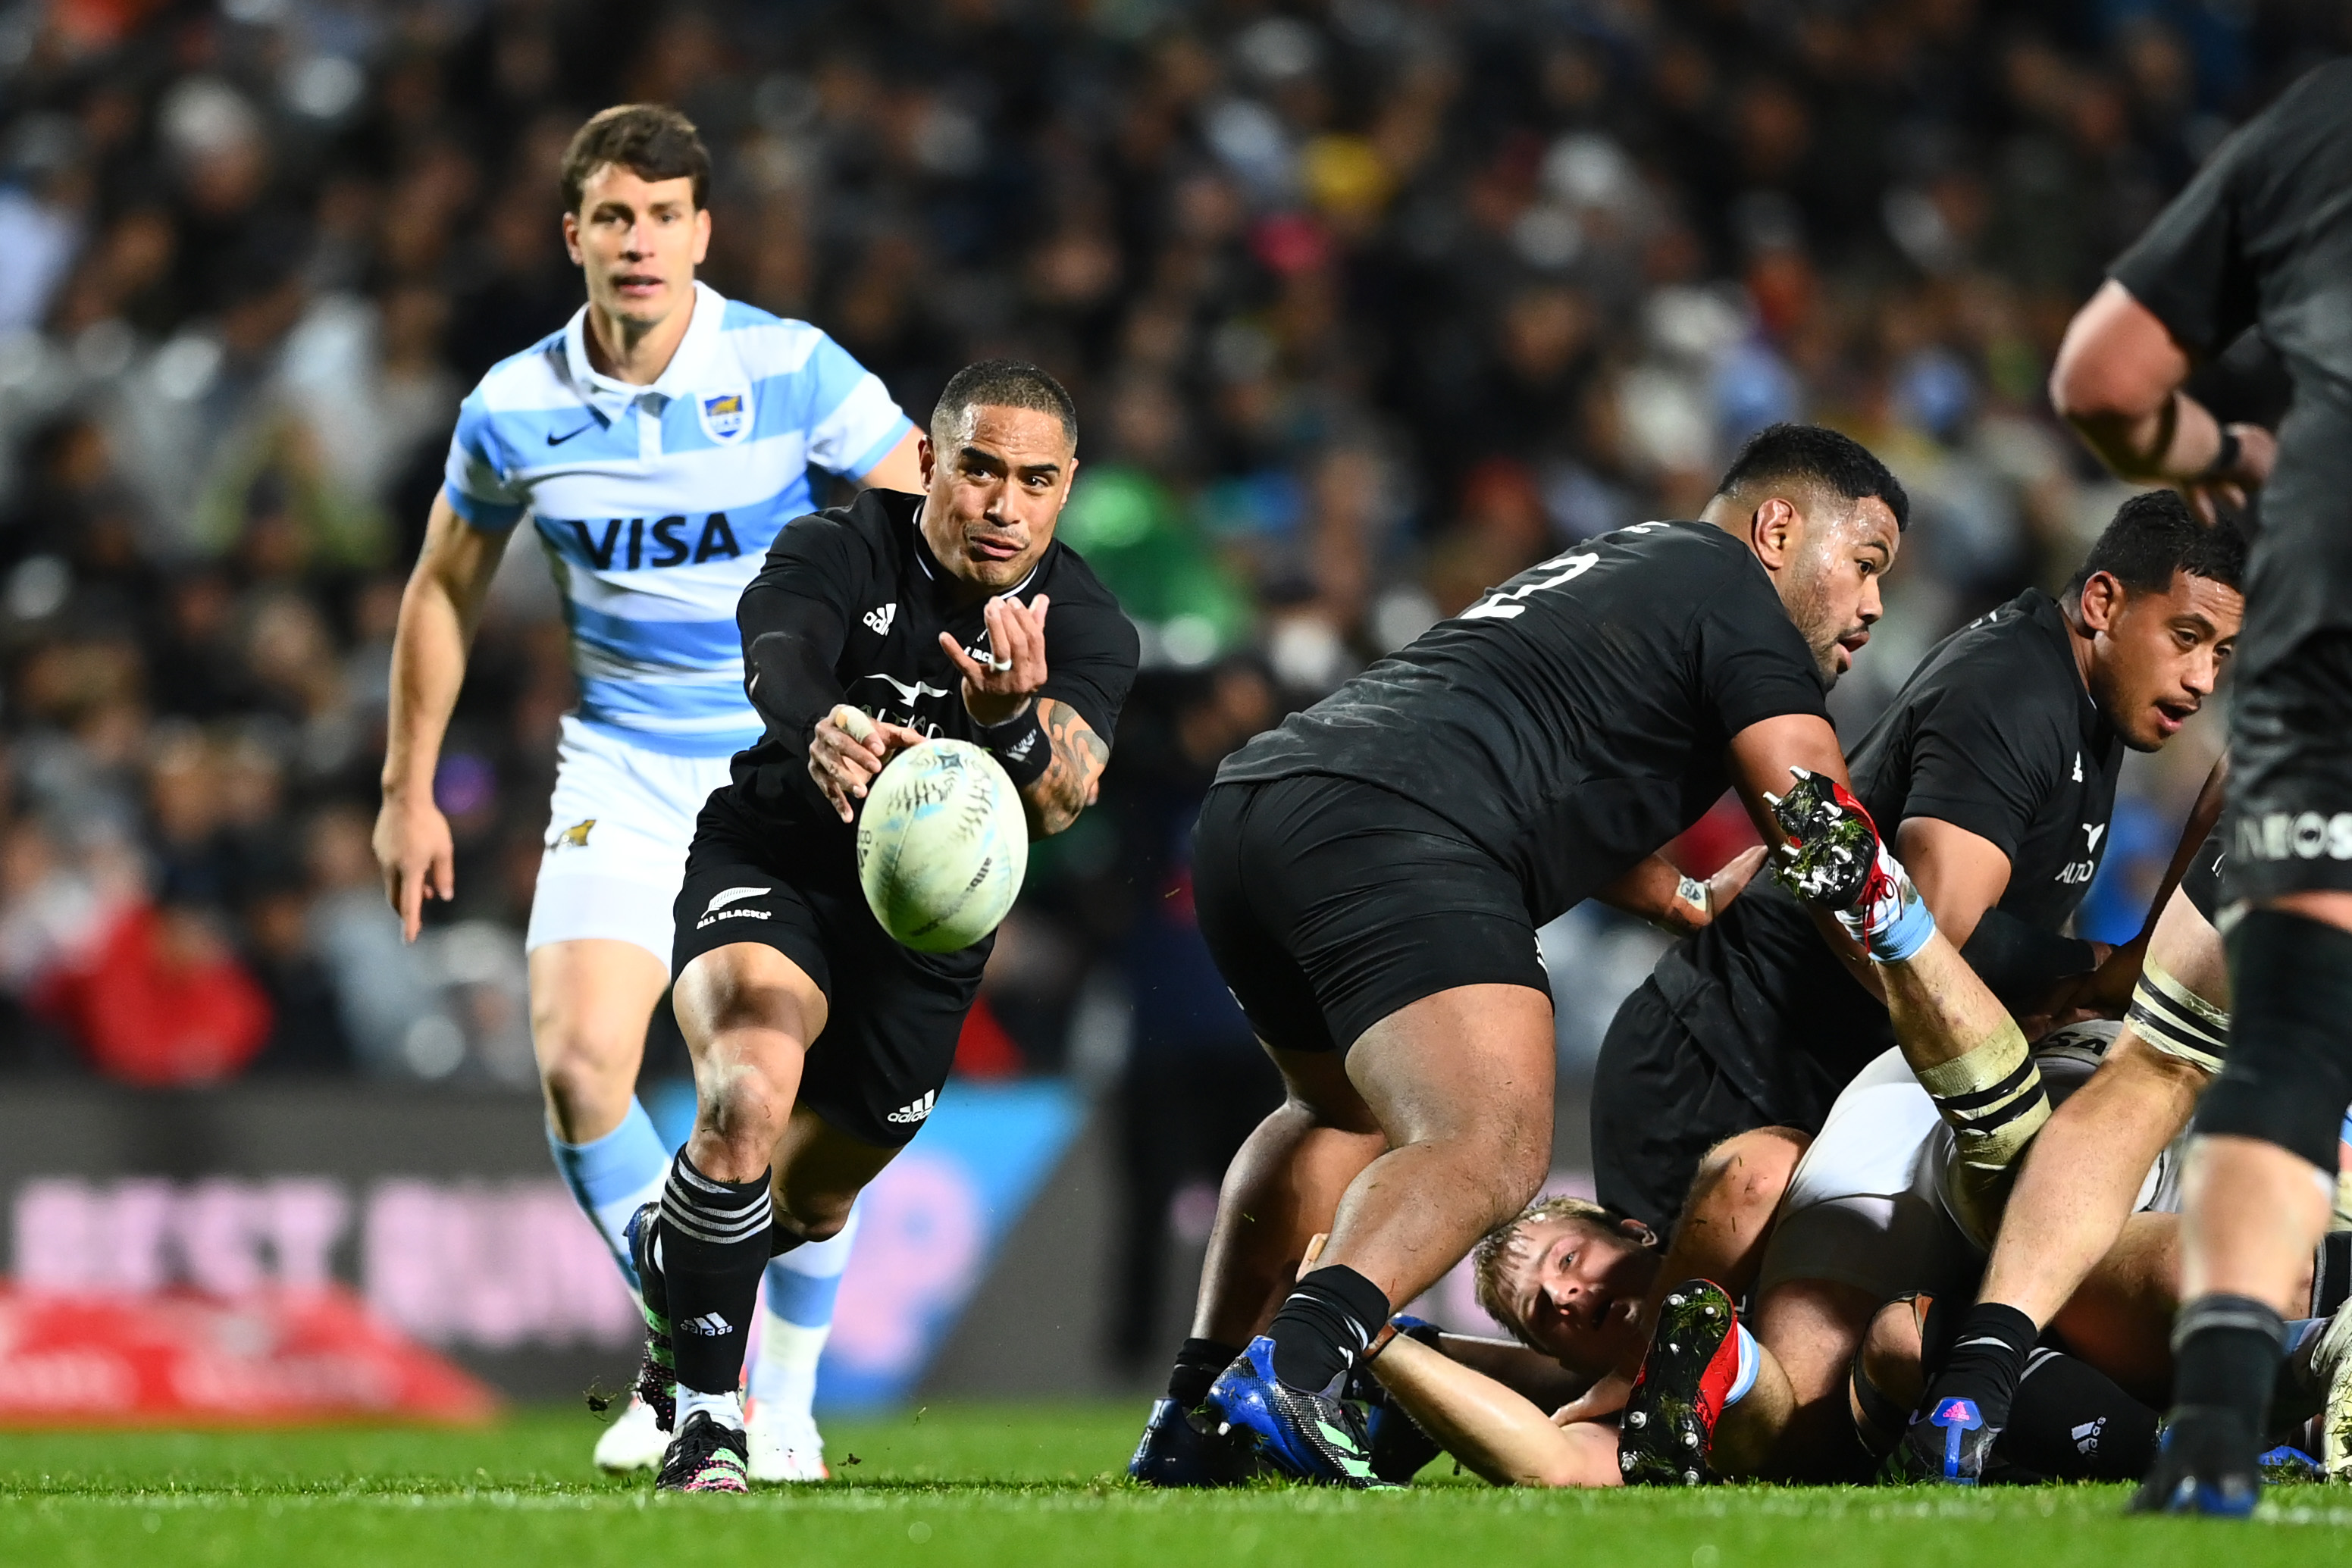 HAMILTON, NEW ZEALAND - SEPTEMBER 03: Aaron Smith of the All Blacks passes the ball during The Rugby Championship match between the New Zealand All Blacks and Argentina Pumas at FMG Stadium Waikato on September 03, 2022 in Hamilton, New Zealand. (Photo by Hannah Peters/Getty Images)